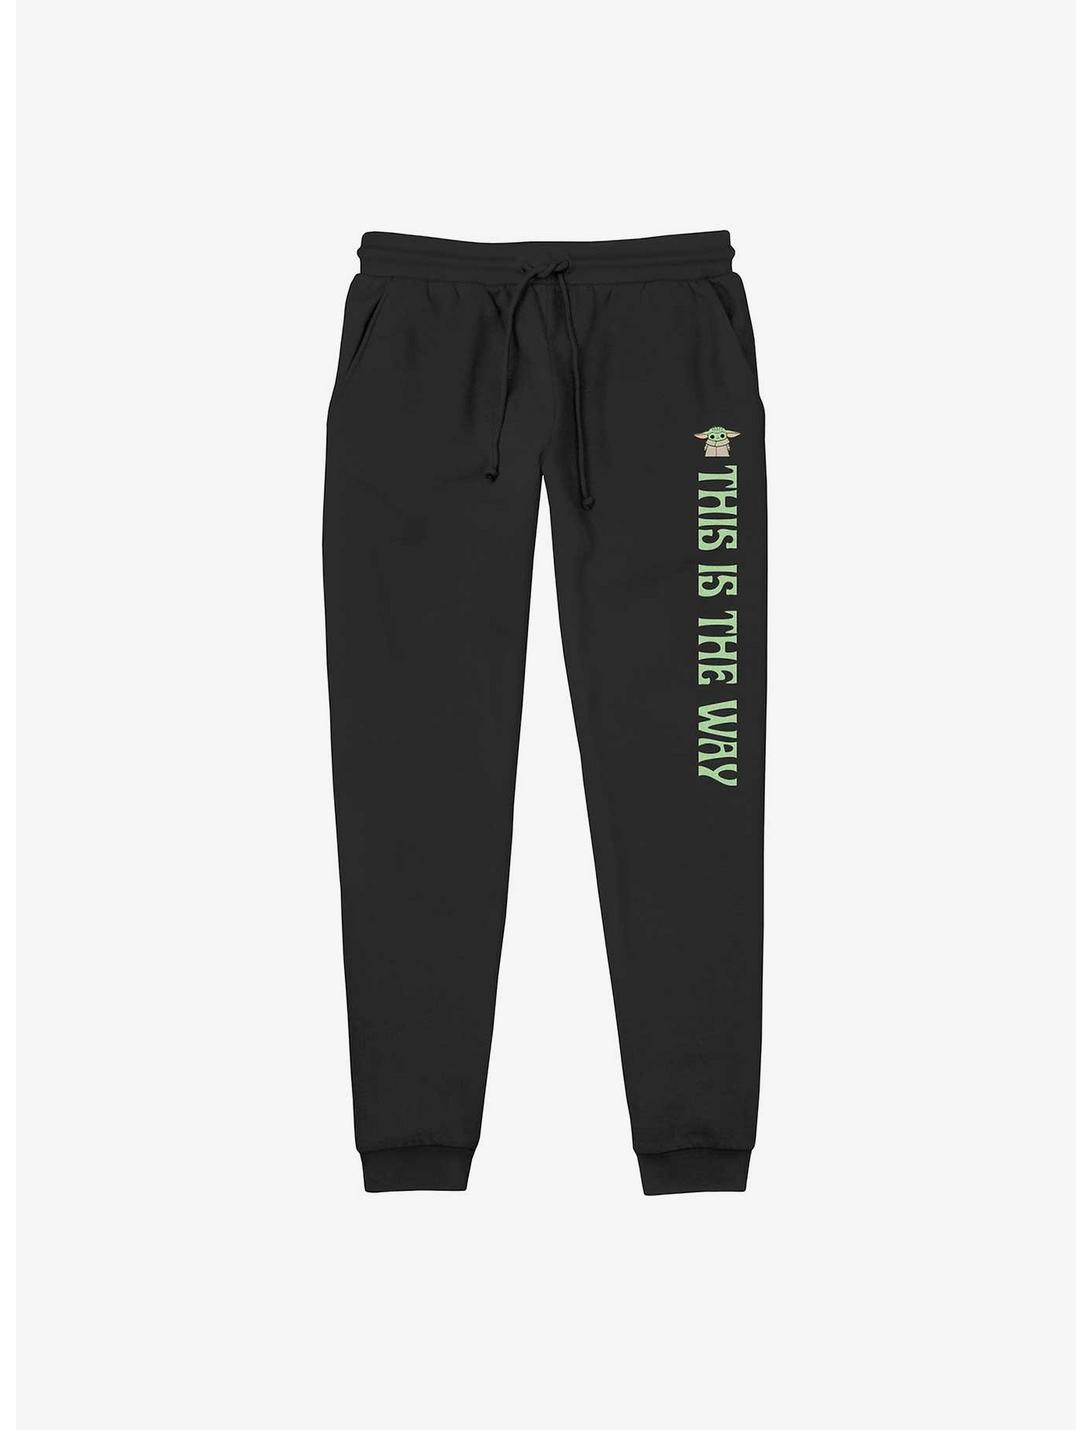 Star Wars The Mandalorian The Child This Is The Way Jogger Sweatpants, BLACK, hi-res